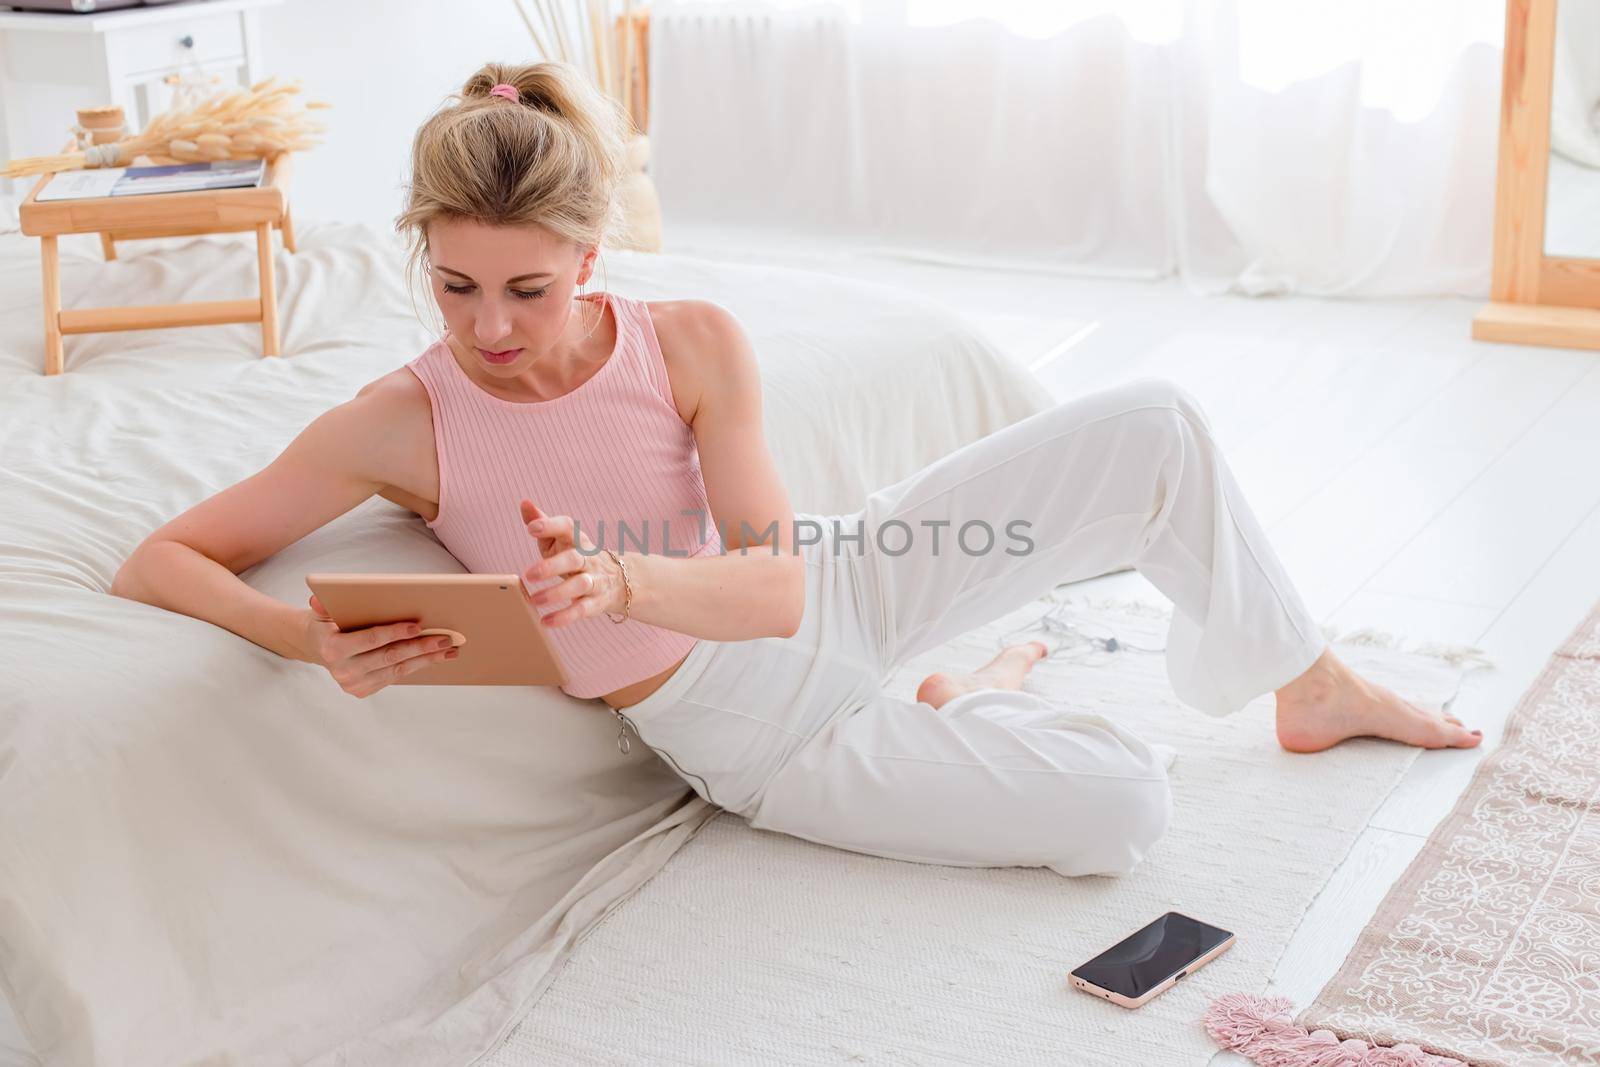 A beautiful slender woman with blond hair, a pink top and white pants, sits on the floor in the morning, near a white bed, watches a digital tablet, a smartphone lies nearby